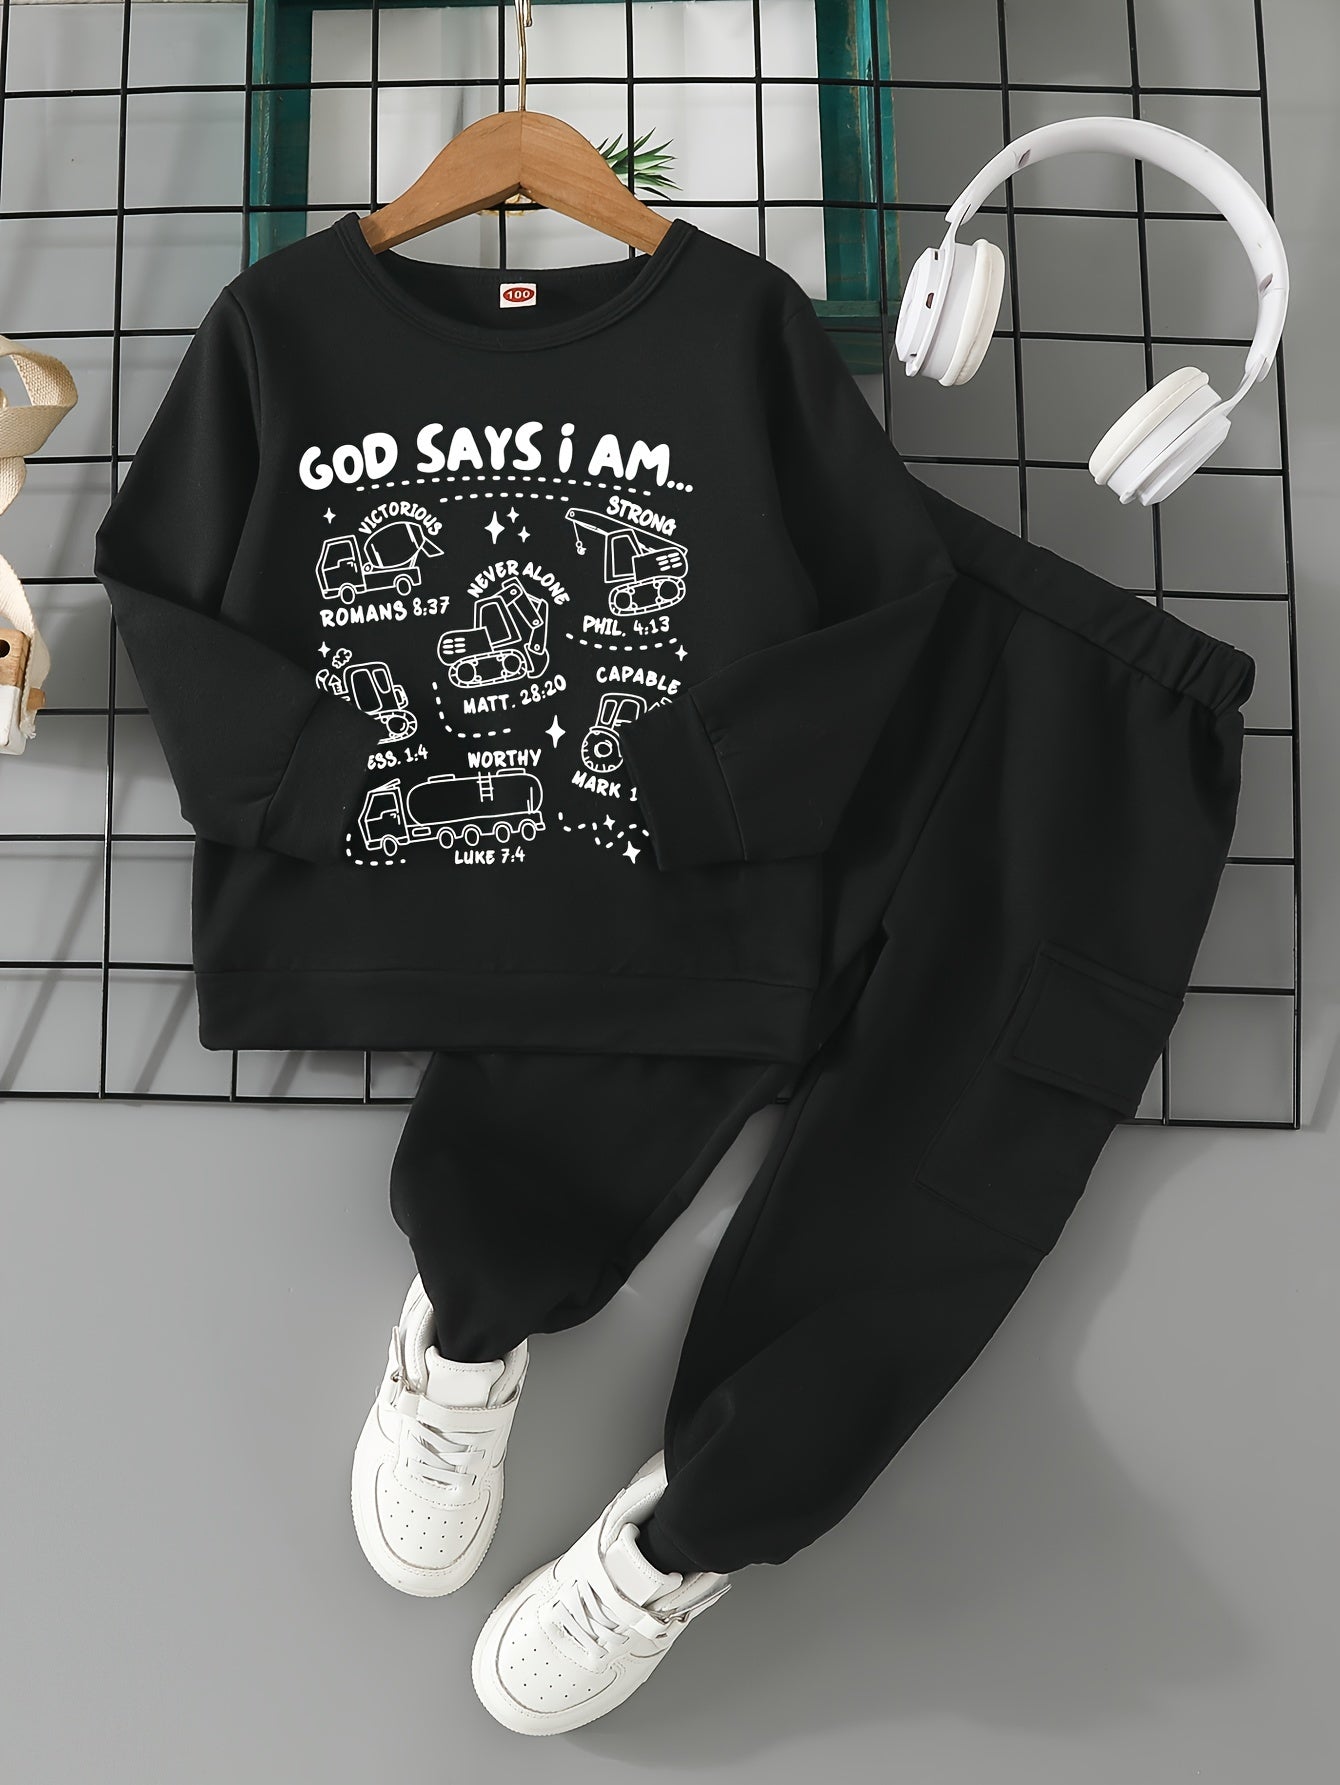 God Says I Am Christian Toddler Casual Outfit claimedbygoddesigns